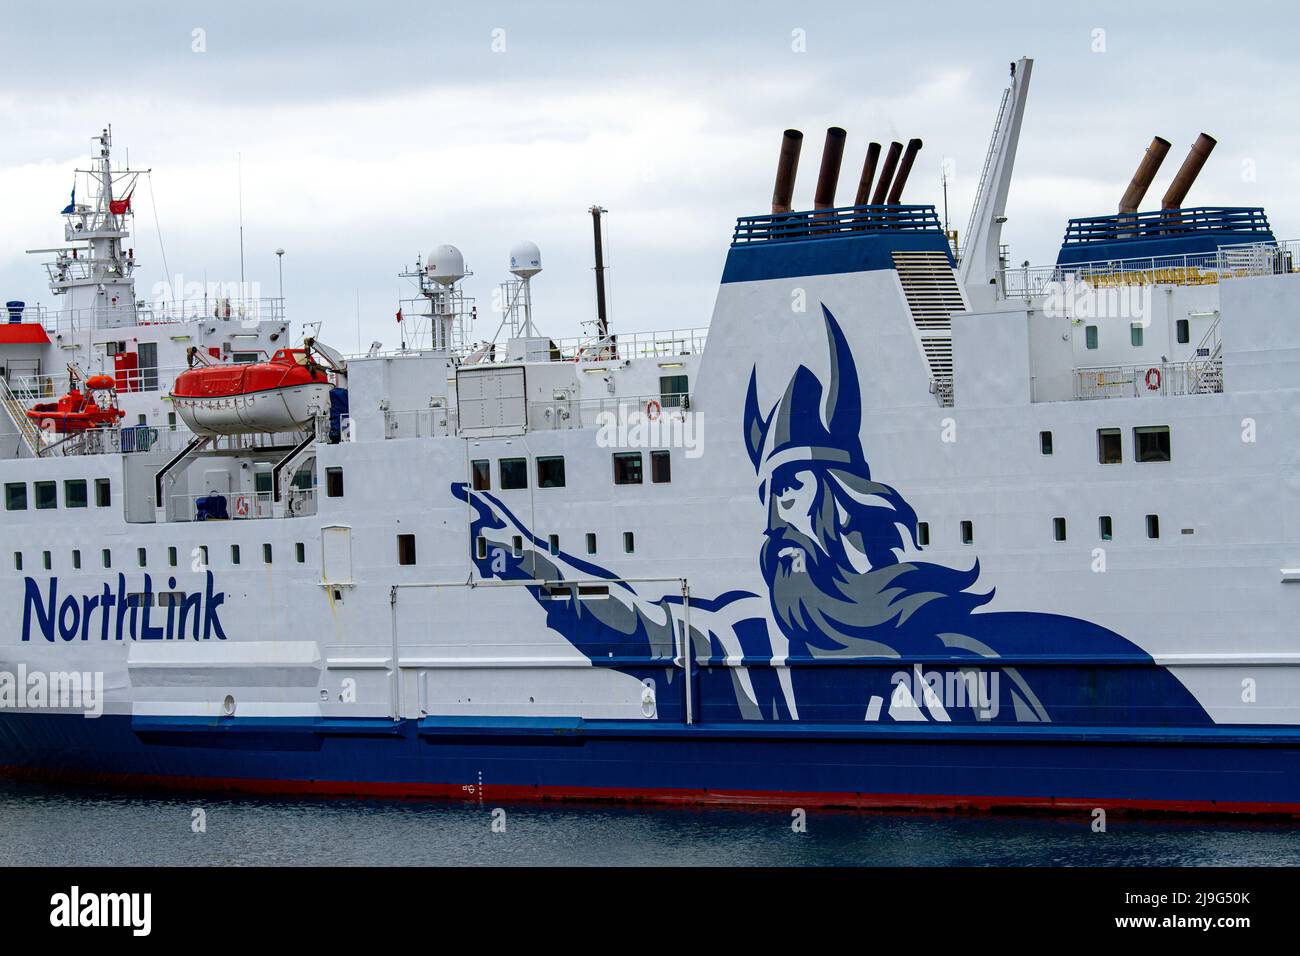 The Northlink ferry Hrossey Kirkwall is docked at Aberdeen Harbour preparing to sail to Kirkwall, Orkney, and Lerwick in Shetland, Scotland Stock Photo